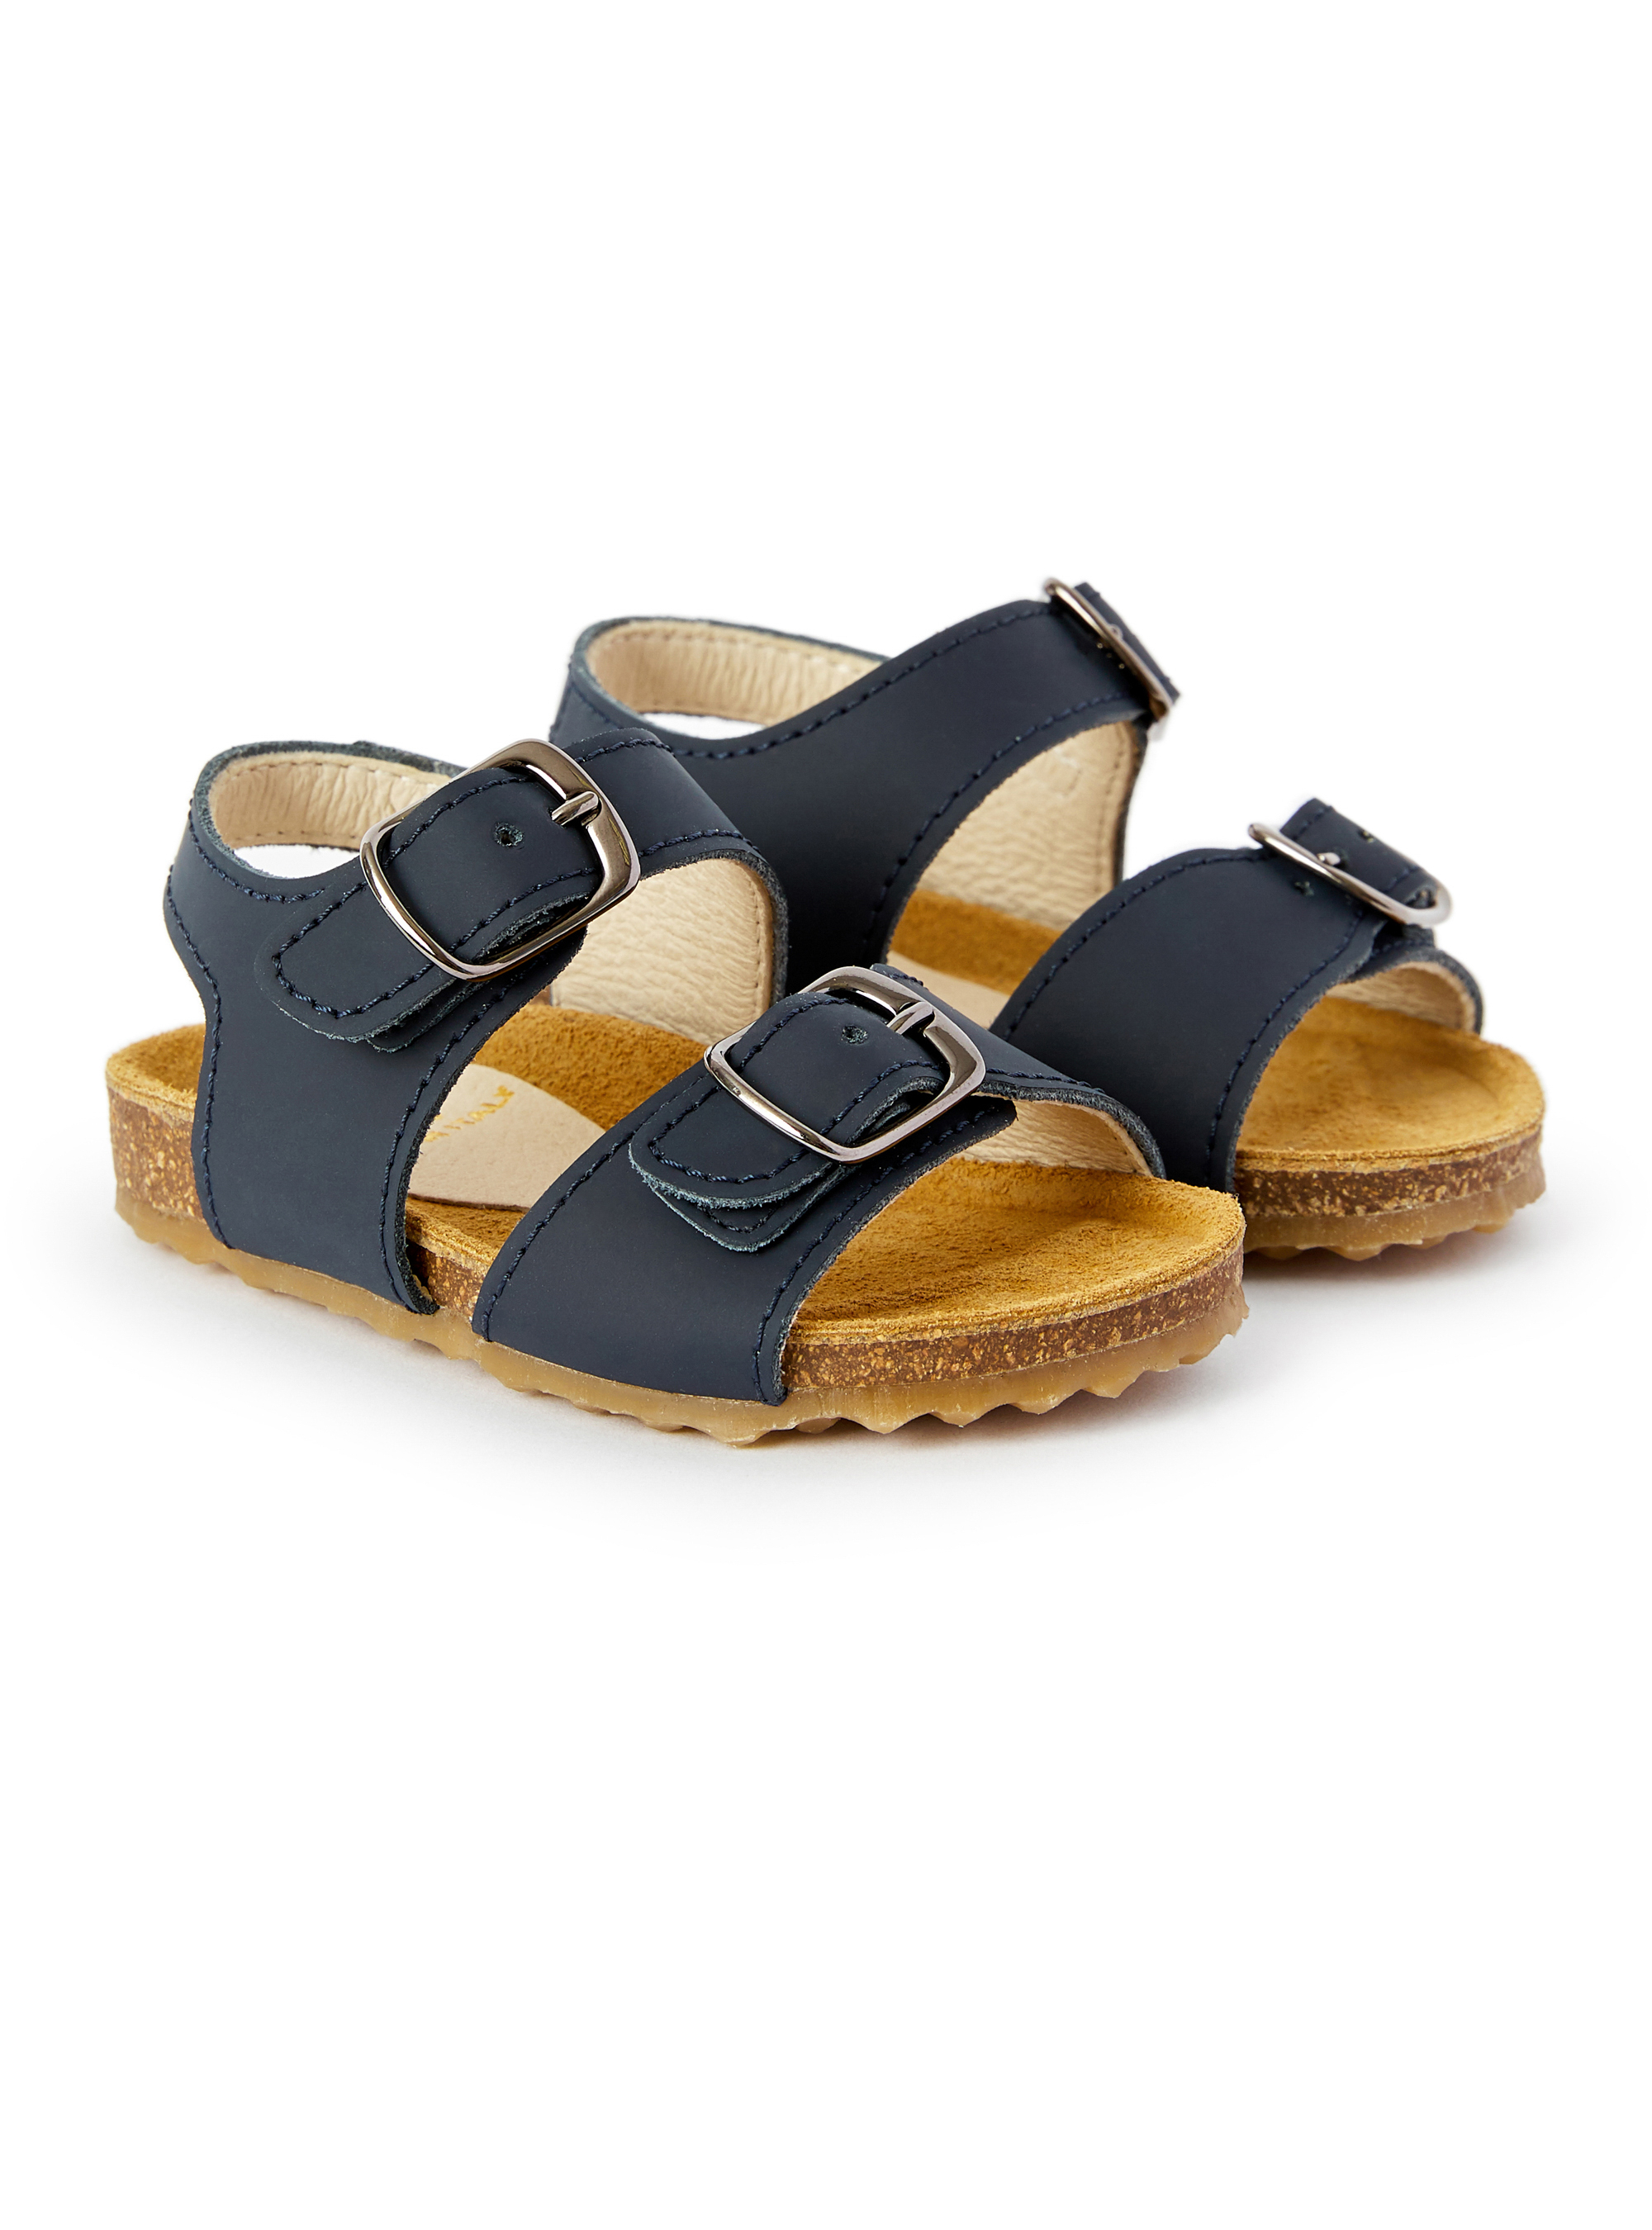 Blue leather sandal with buckles - Shoes - Il Gufo